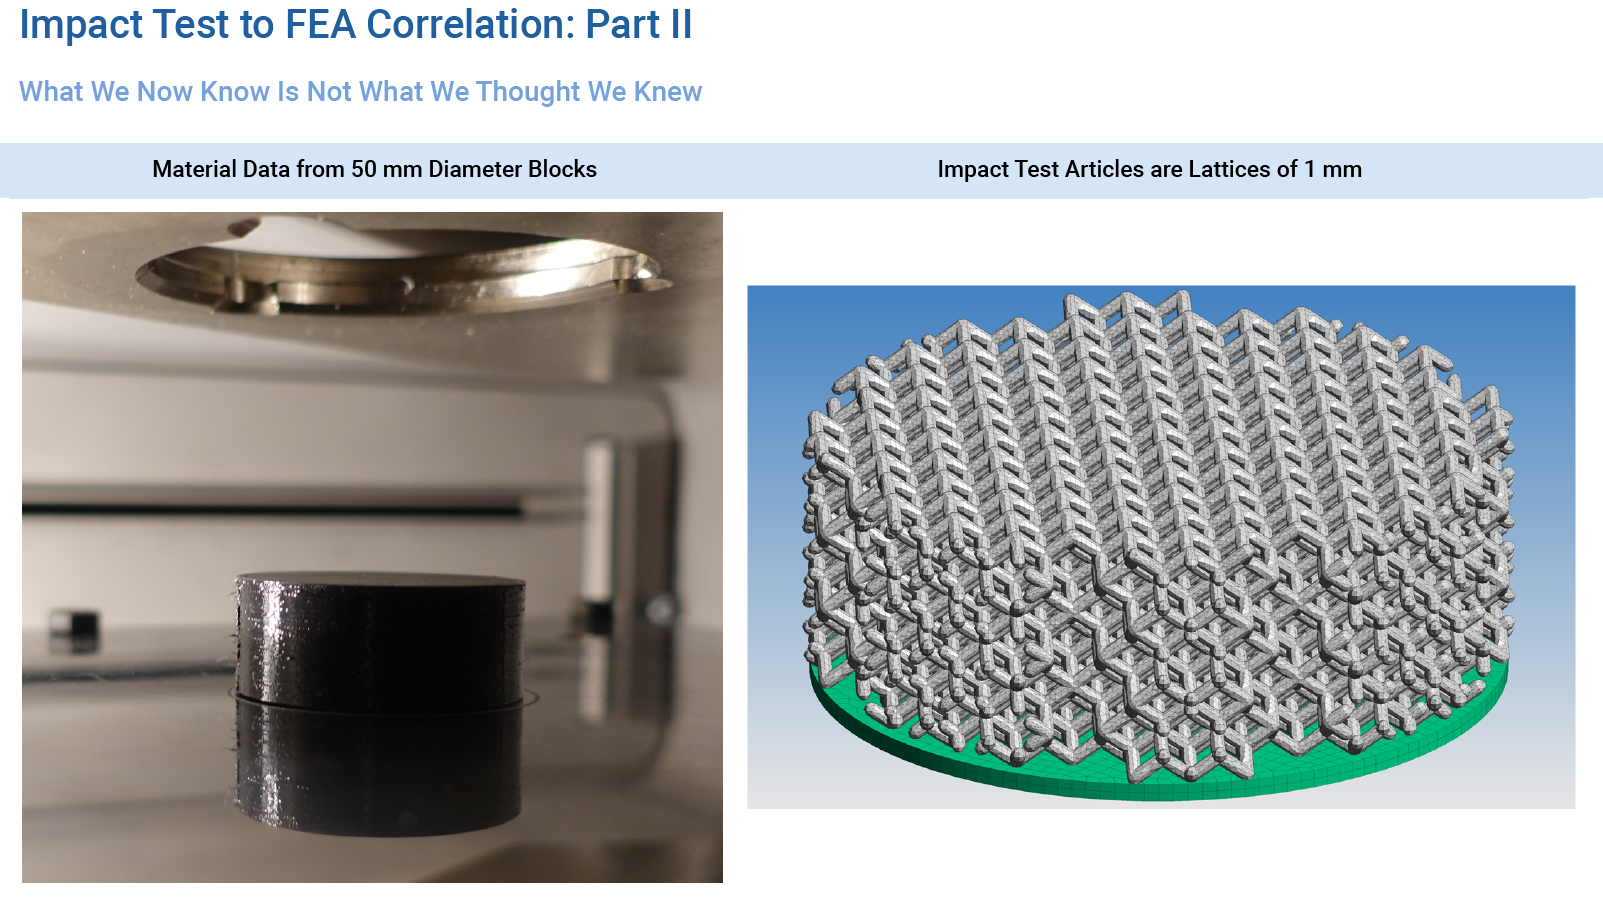 Impact Test to FEA Correlation Part II - What We Now Know is Not What We Thought We Knew